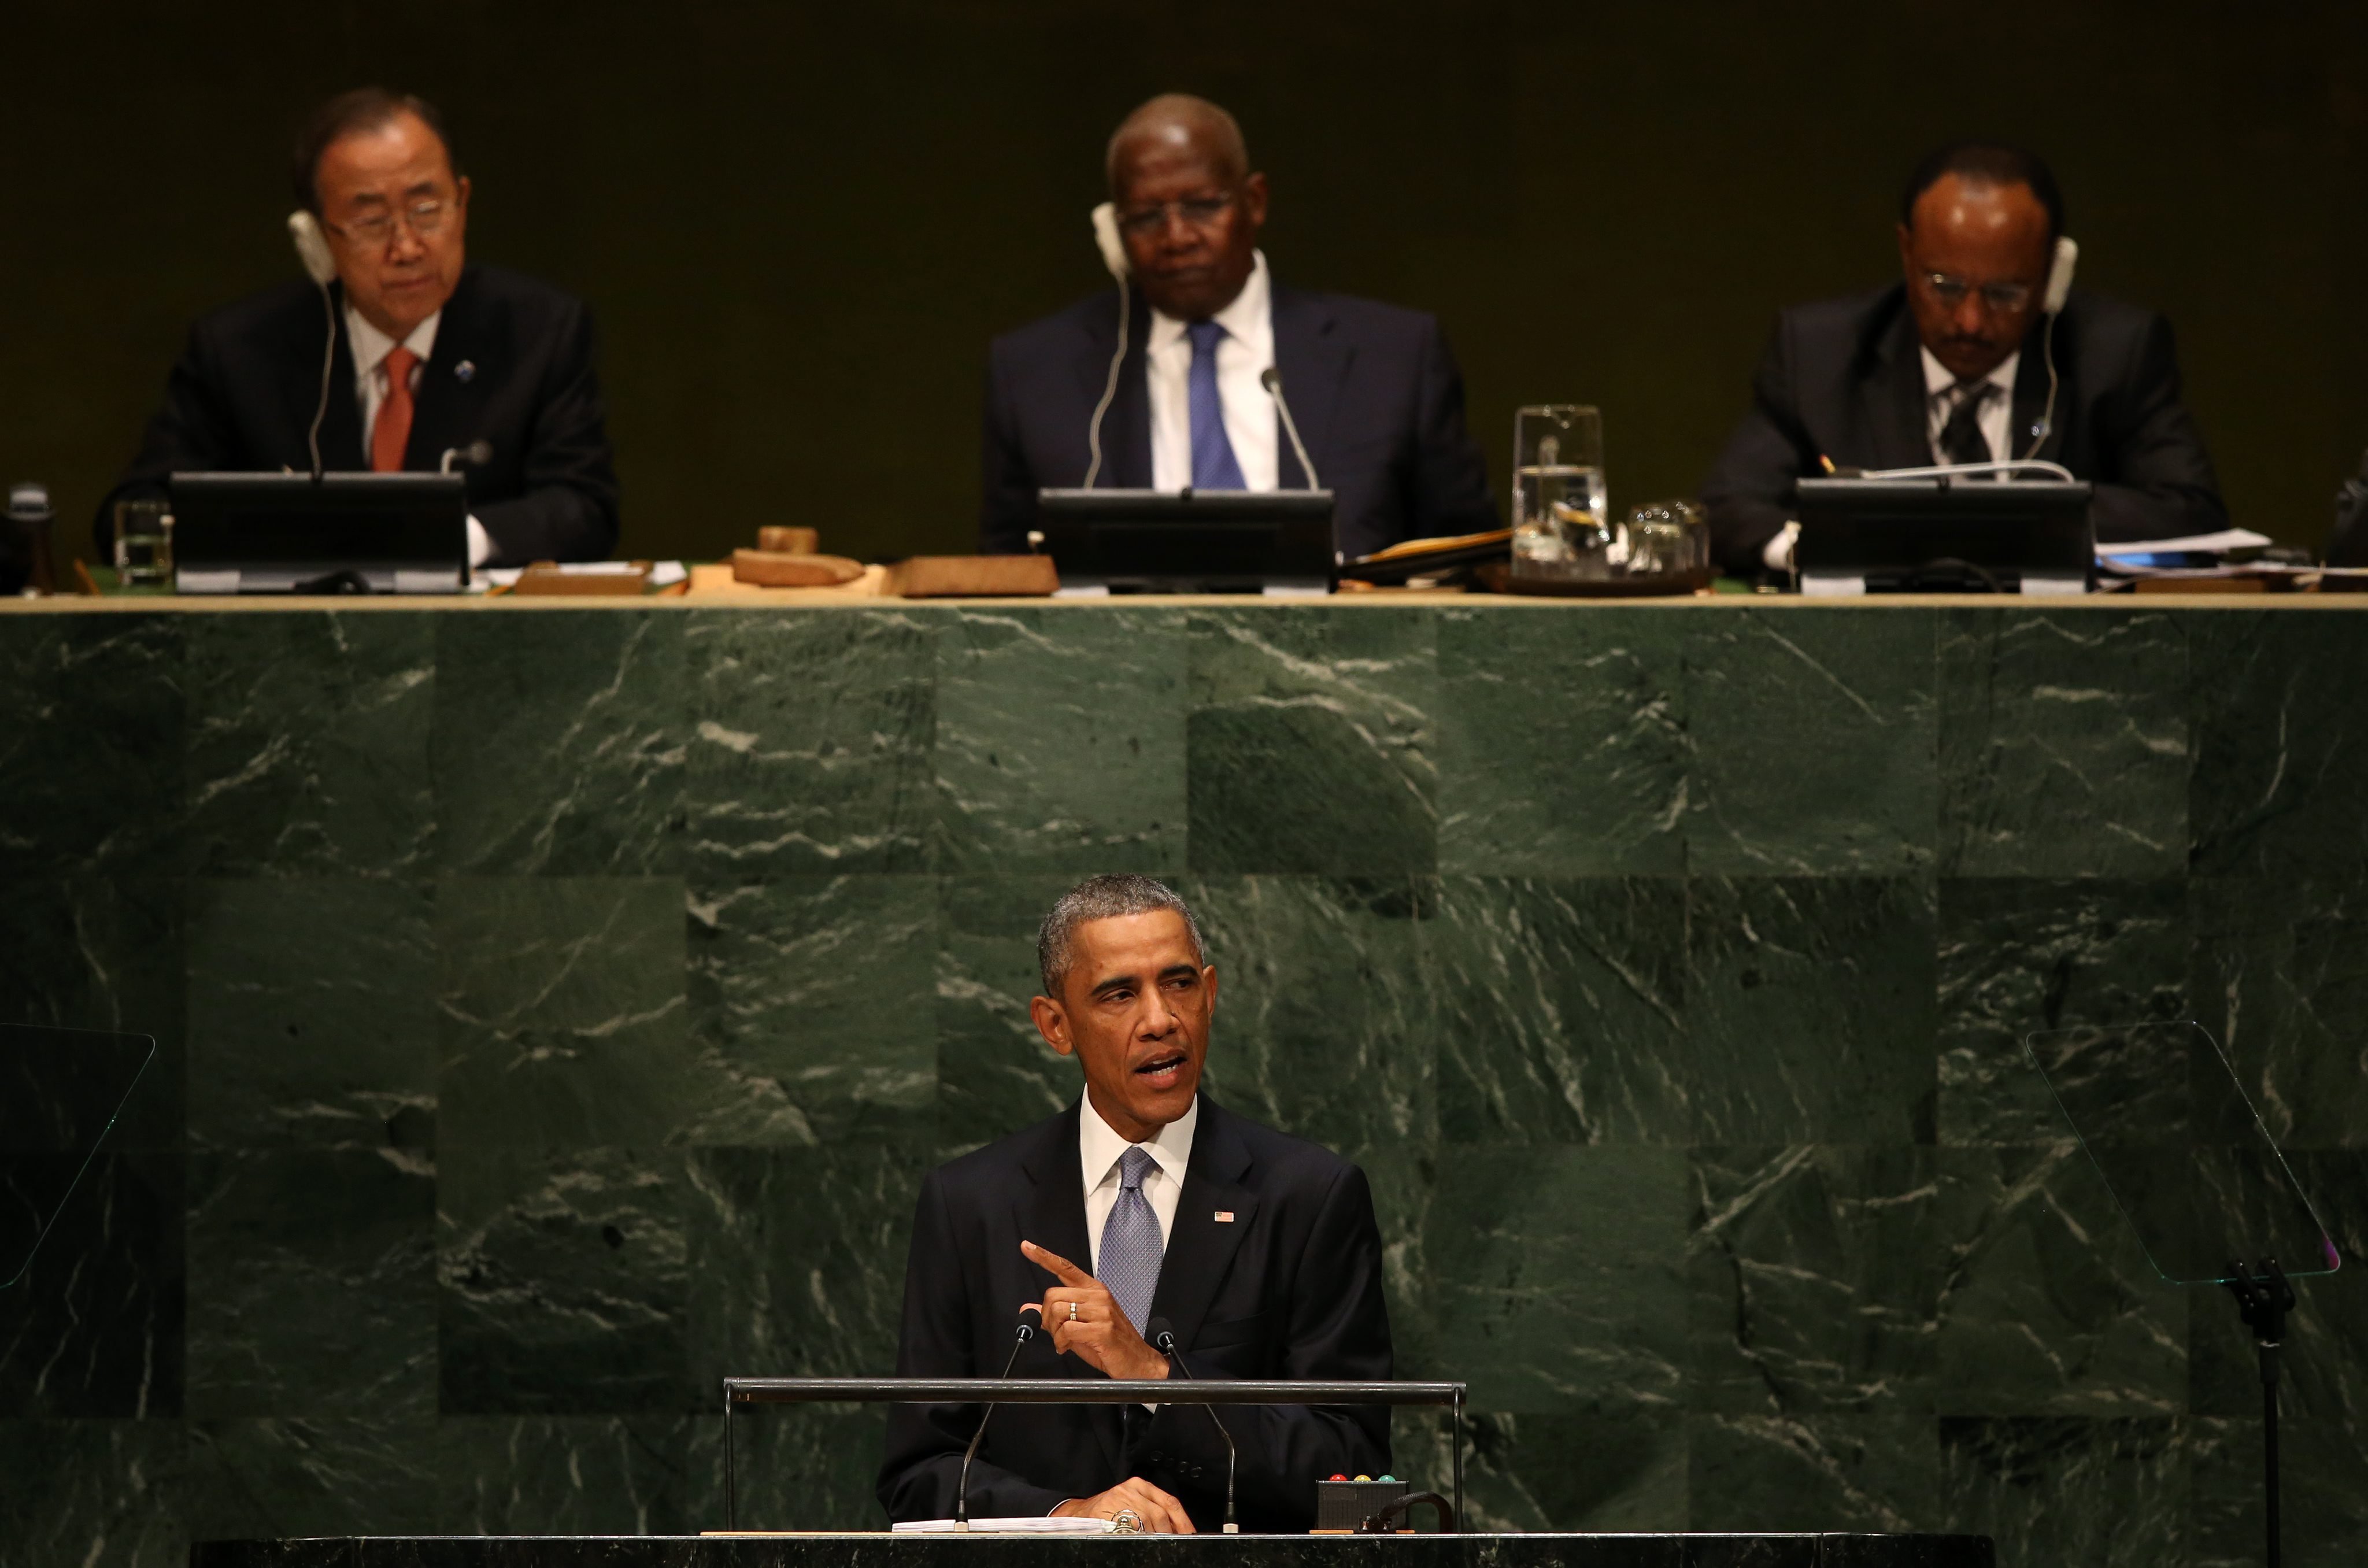 President Barack Obama speaks during the general debate of the 69th session of the United Nations General Assembly at the United Nations headquarters in New York on Sept. 24, 2014. (Justin Lane—EPA)